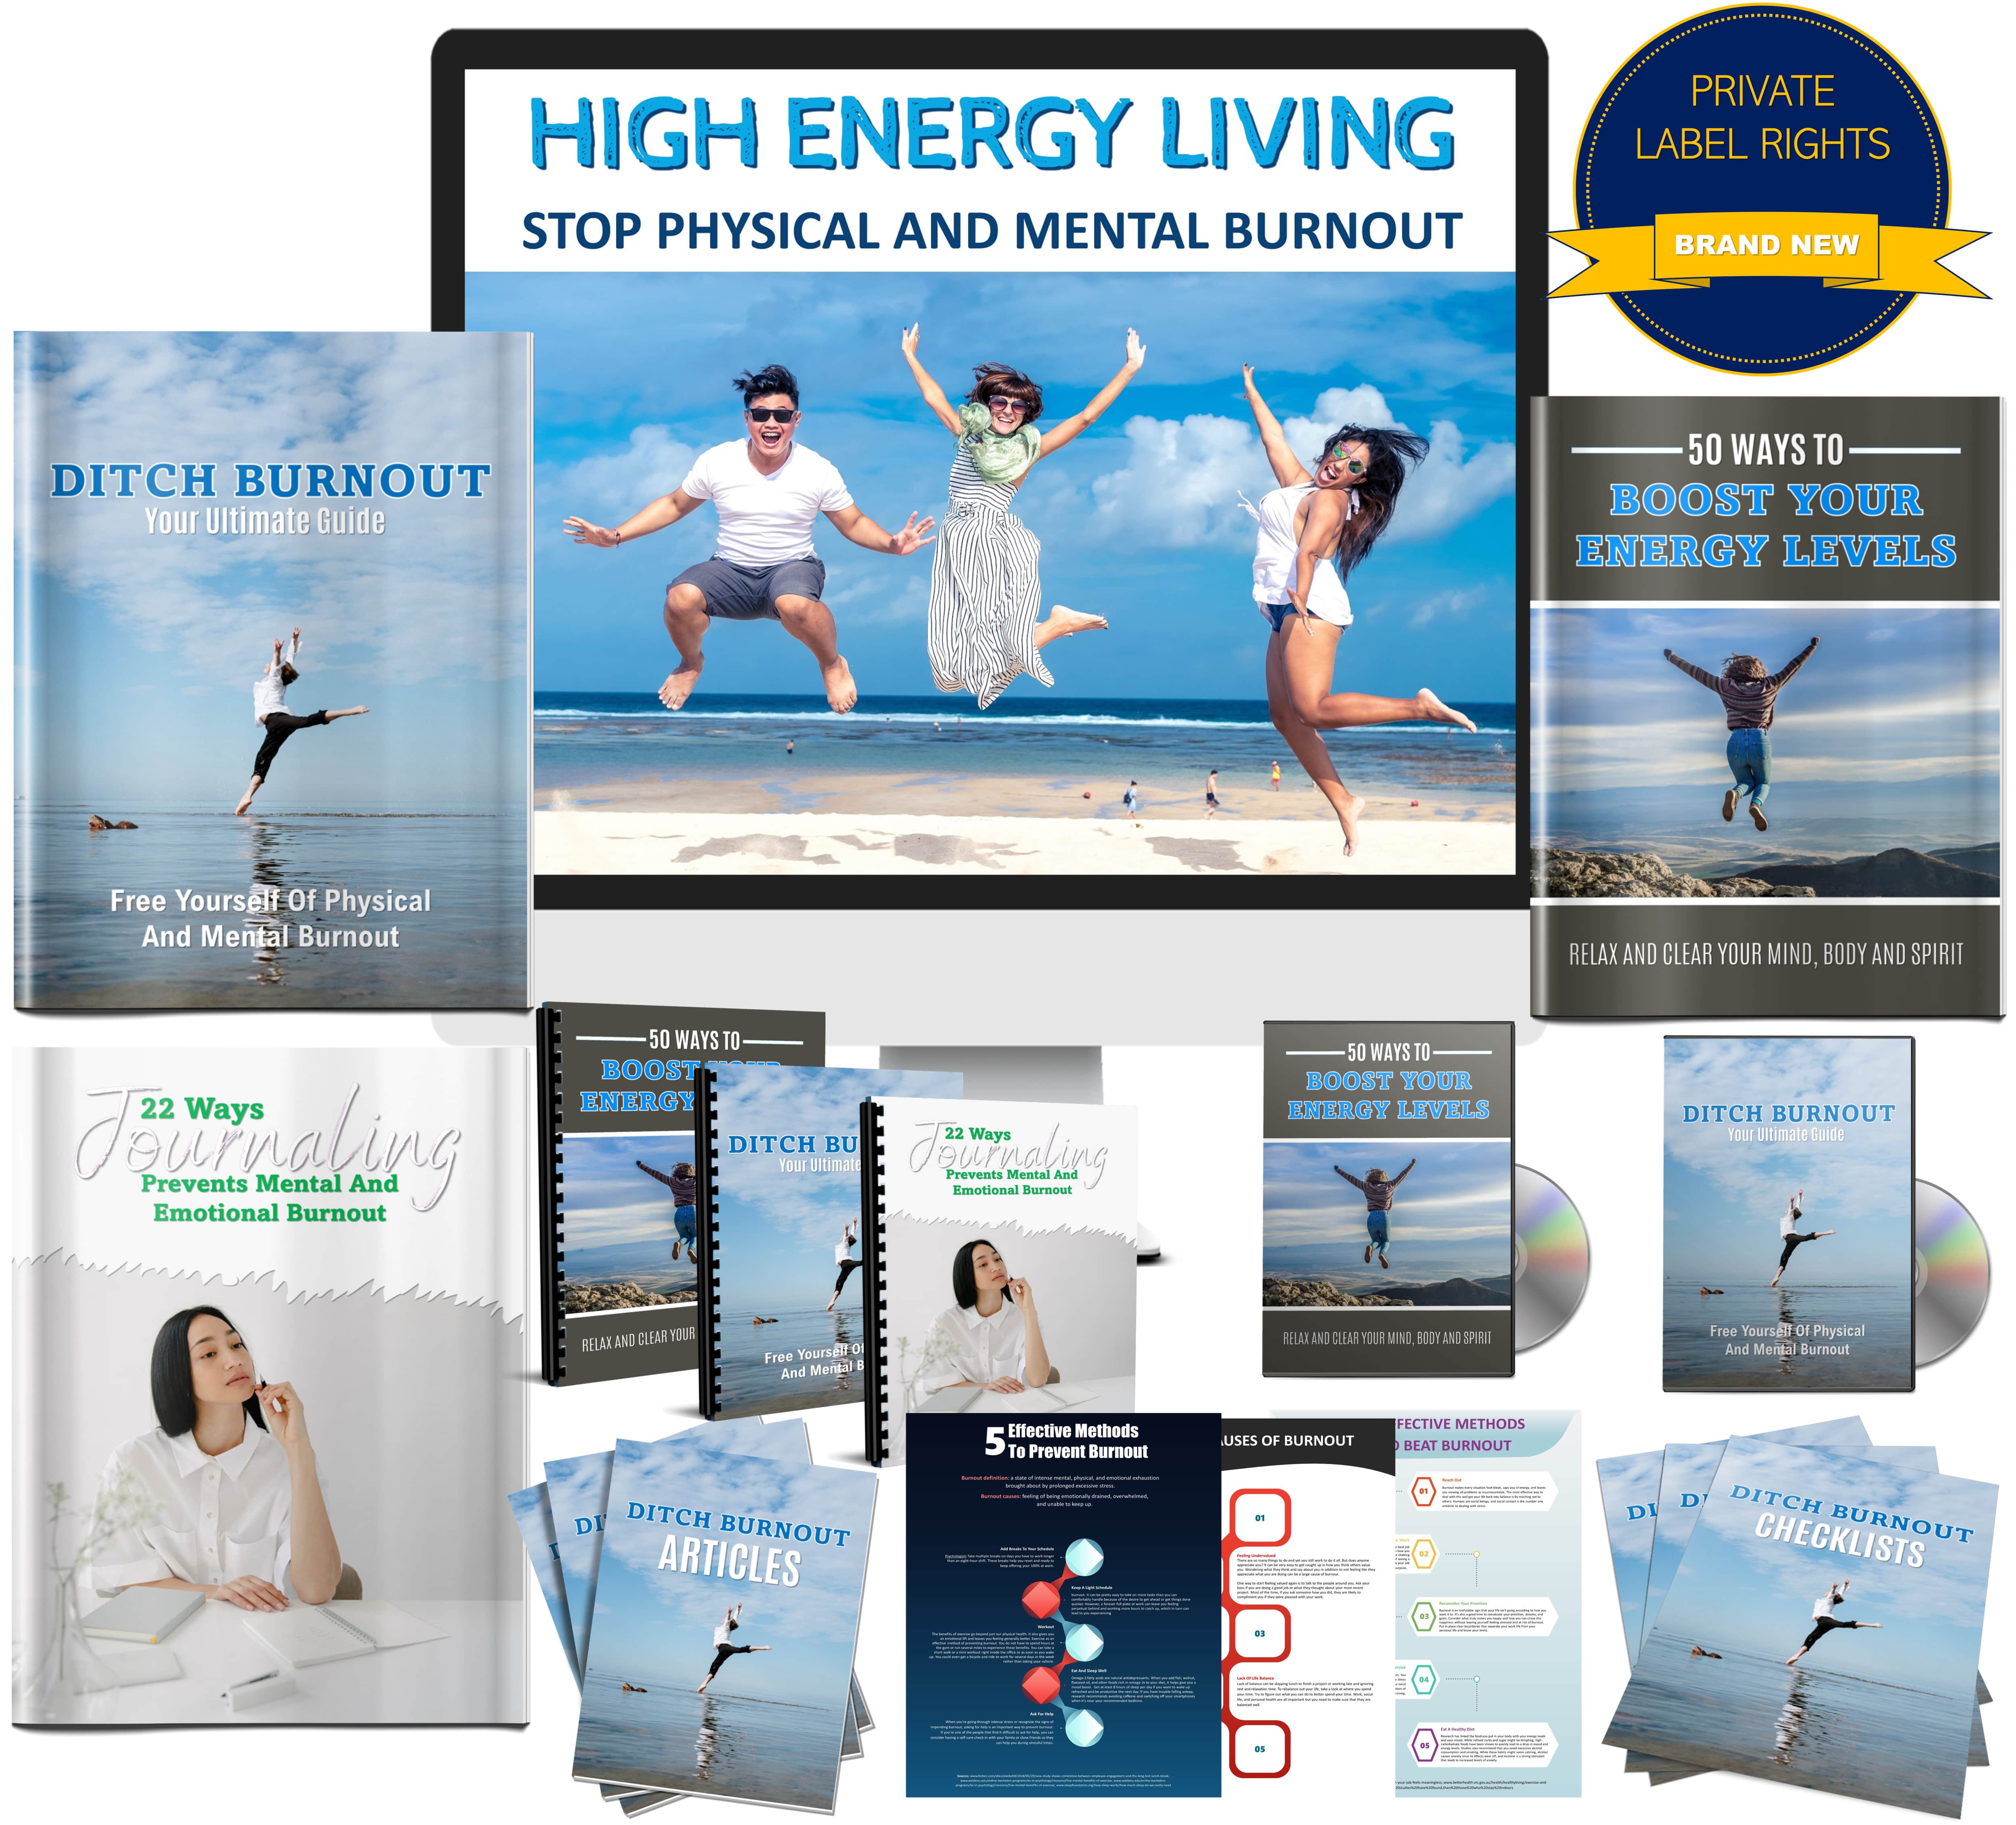 High Energy Living: Stop Physical And Mental Burnout Content Pack with PLR Rights